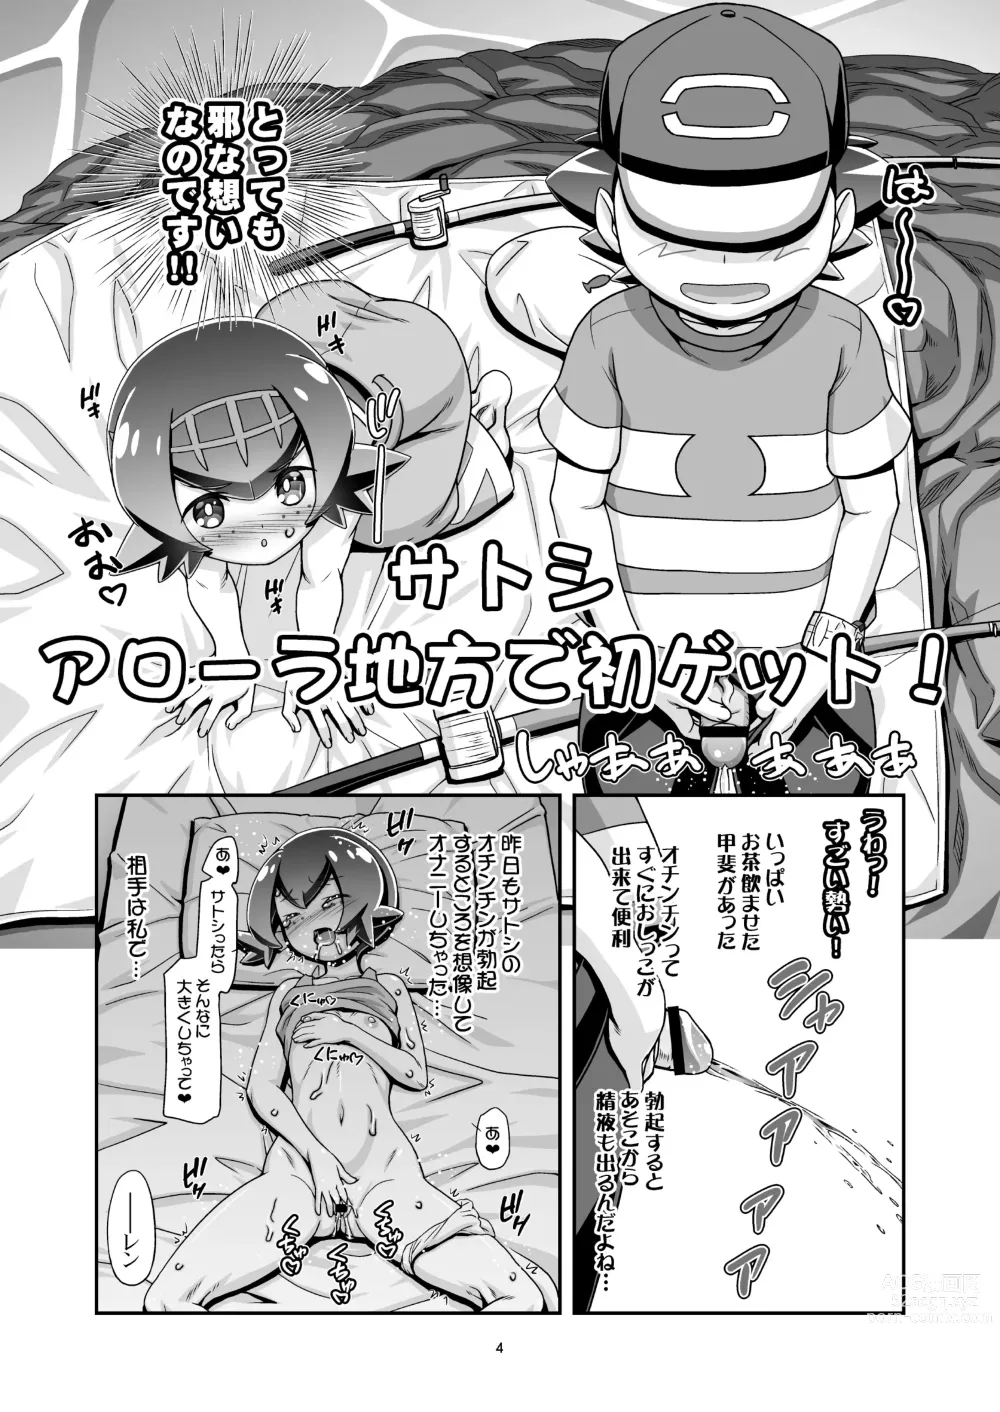 Page 3 of doujinshi PM GALS SUNMOON